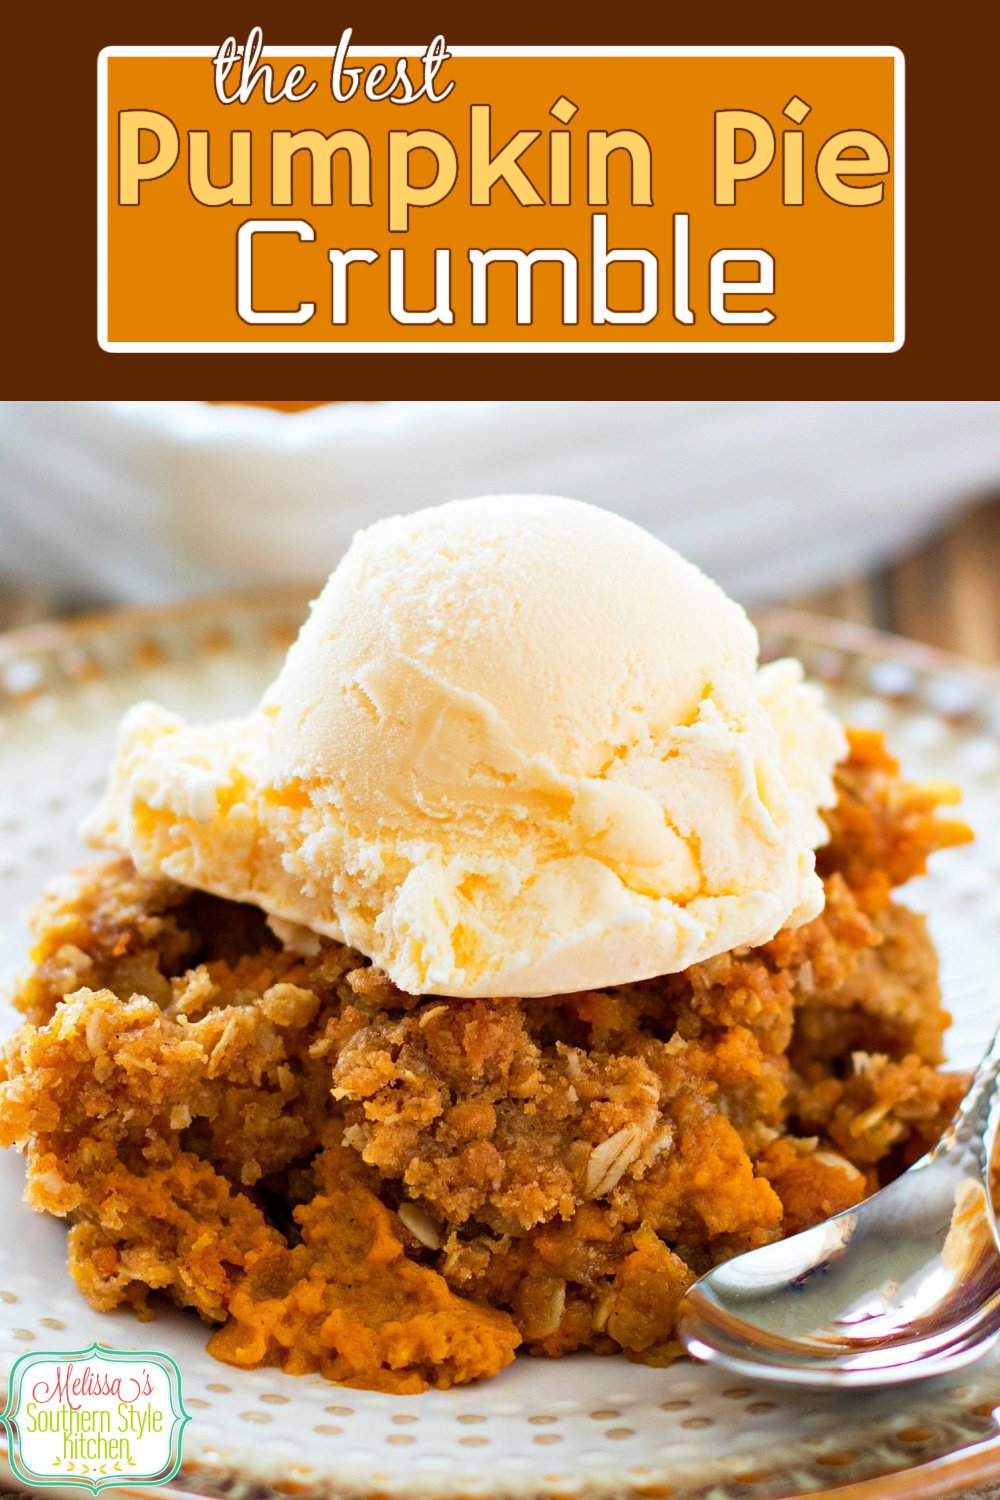 This Pumpkin Pie Crumble combines the best of two classic fall desserts #pumpkinpie #pumpkinpiecrumble #pumpkincrips #pumpkinpierecipes #bestpumpkindesserts #fallbaking #pumpkindesserts #desserts #dessertfoodrecipes #thankgivingdesserts #southernfood #southernrecipes via @melissasssk